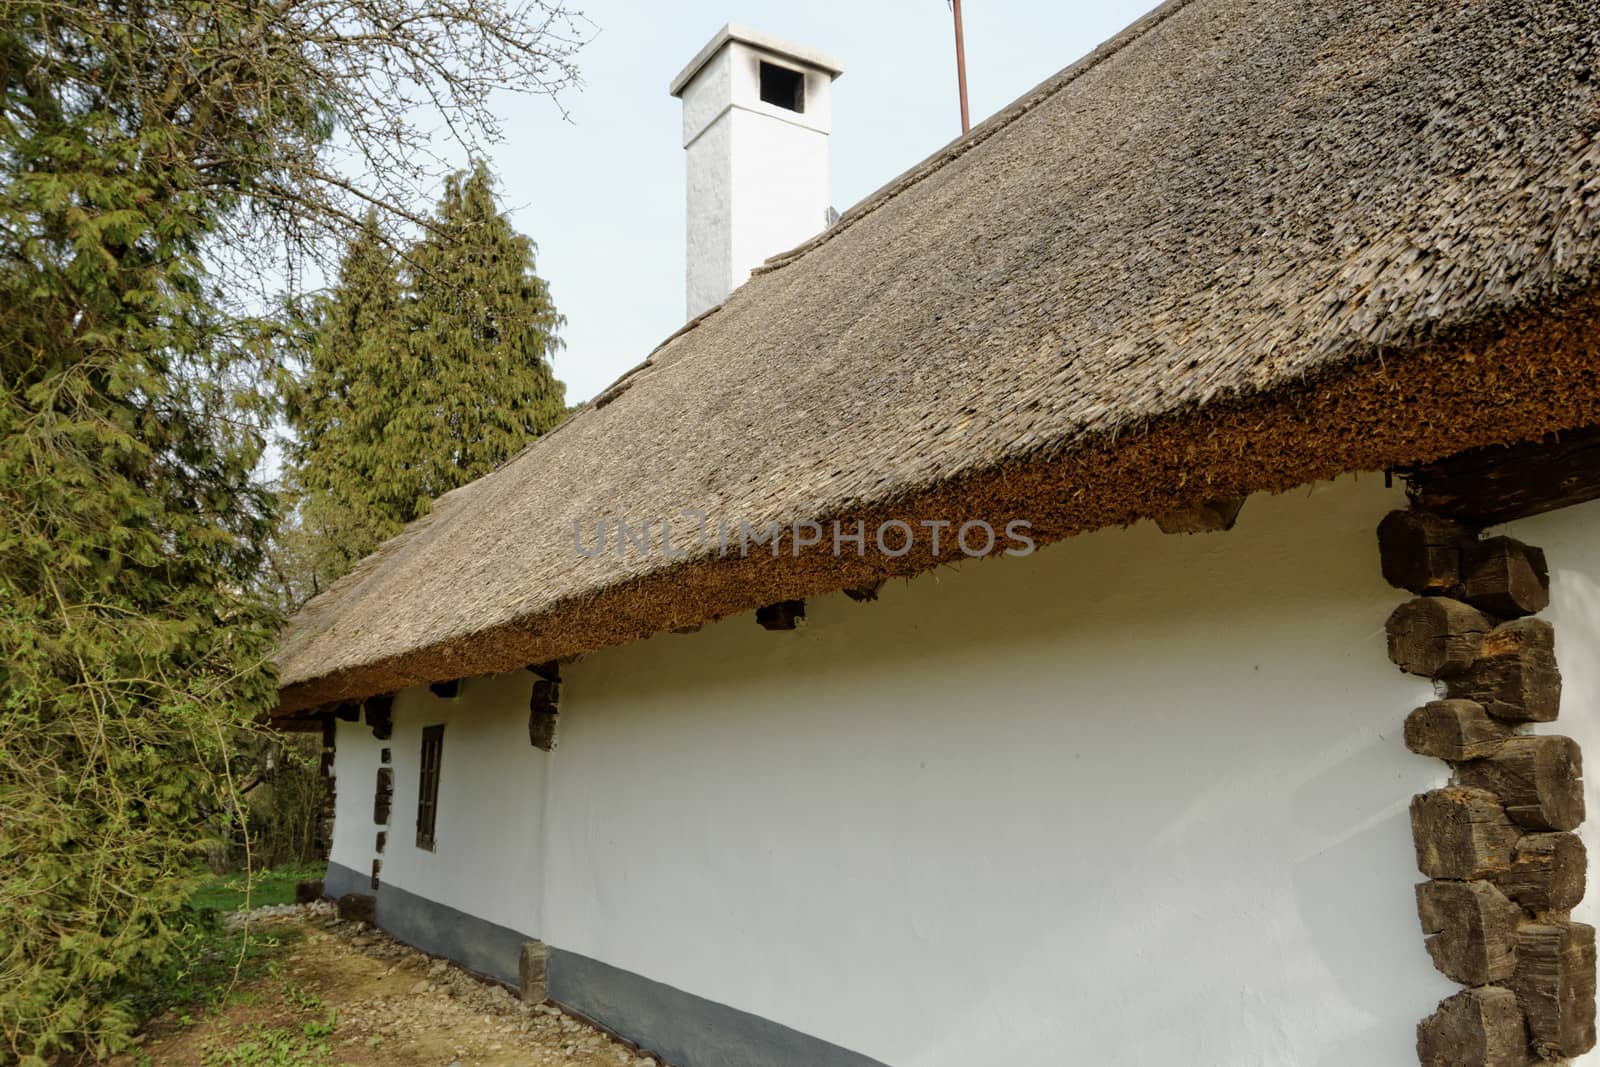 Old farmhouse with a thatched roof